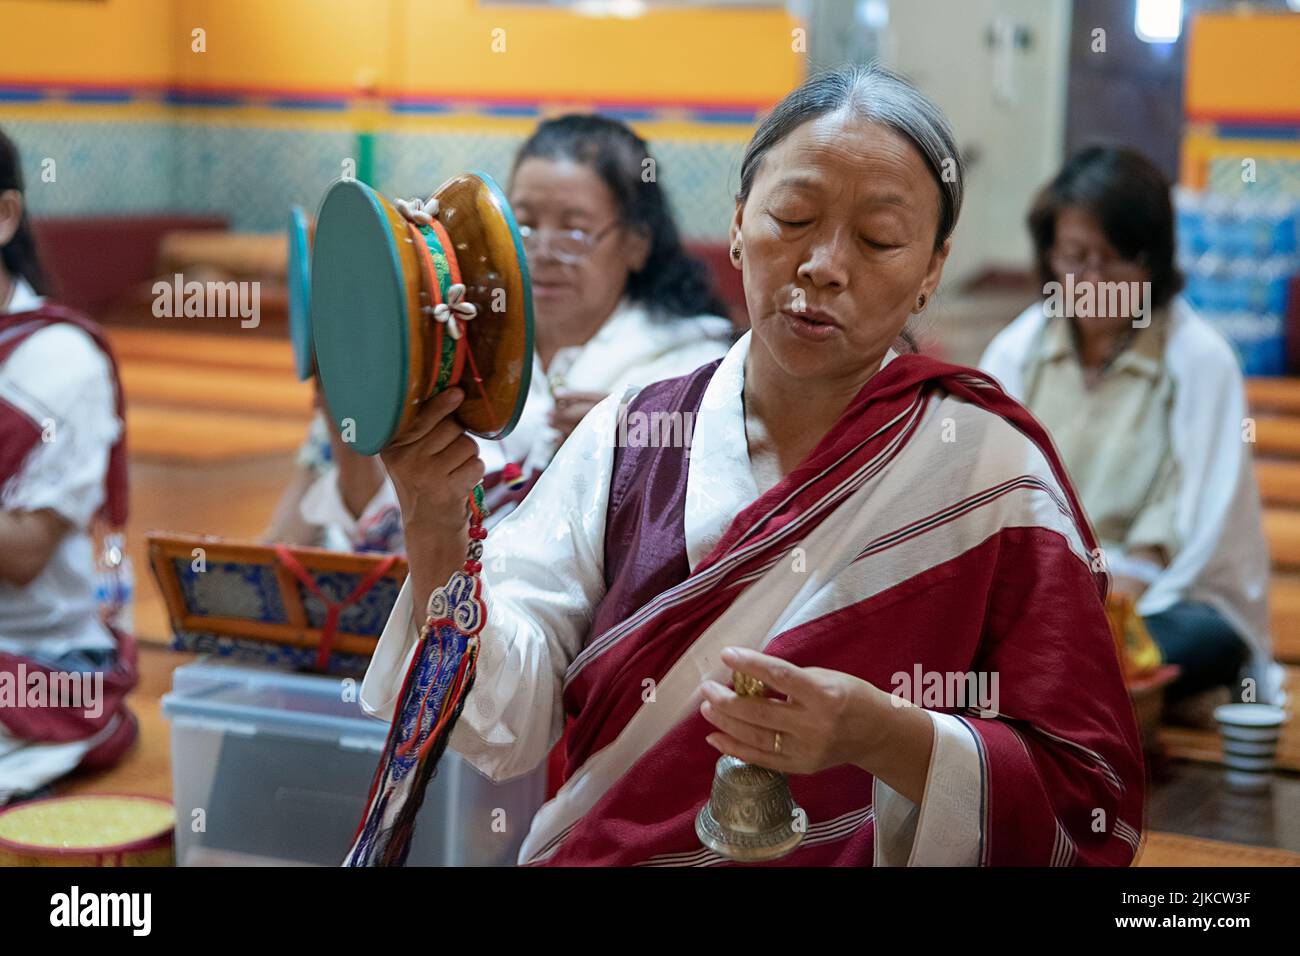 A devout Nepalese Buddhist woman praying in a temple while ringing a bell & rotating a damaru drum. In Elmhurst, Queens, New York City. Stock Photo